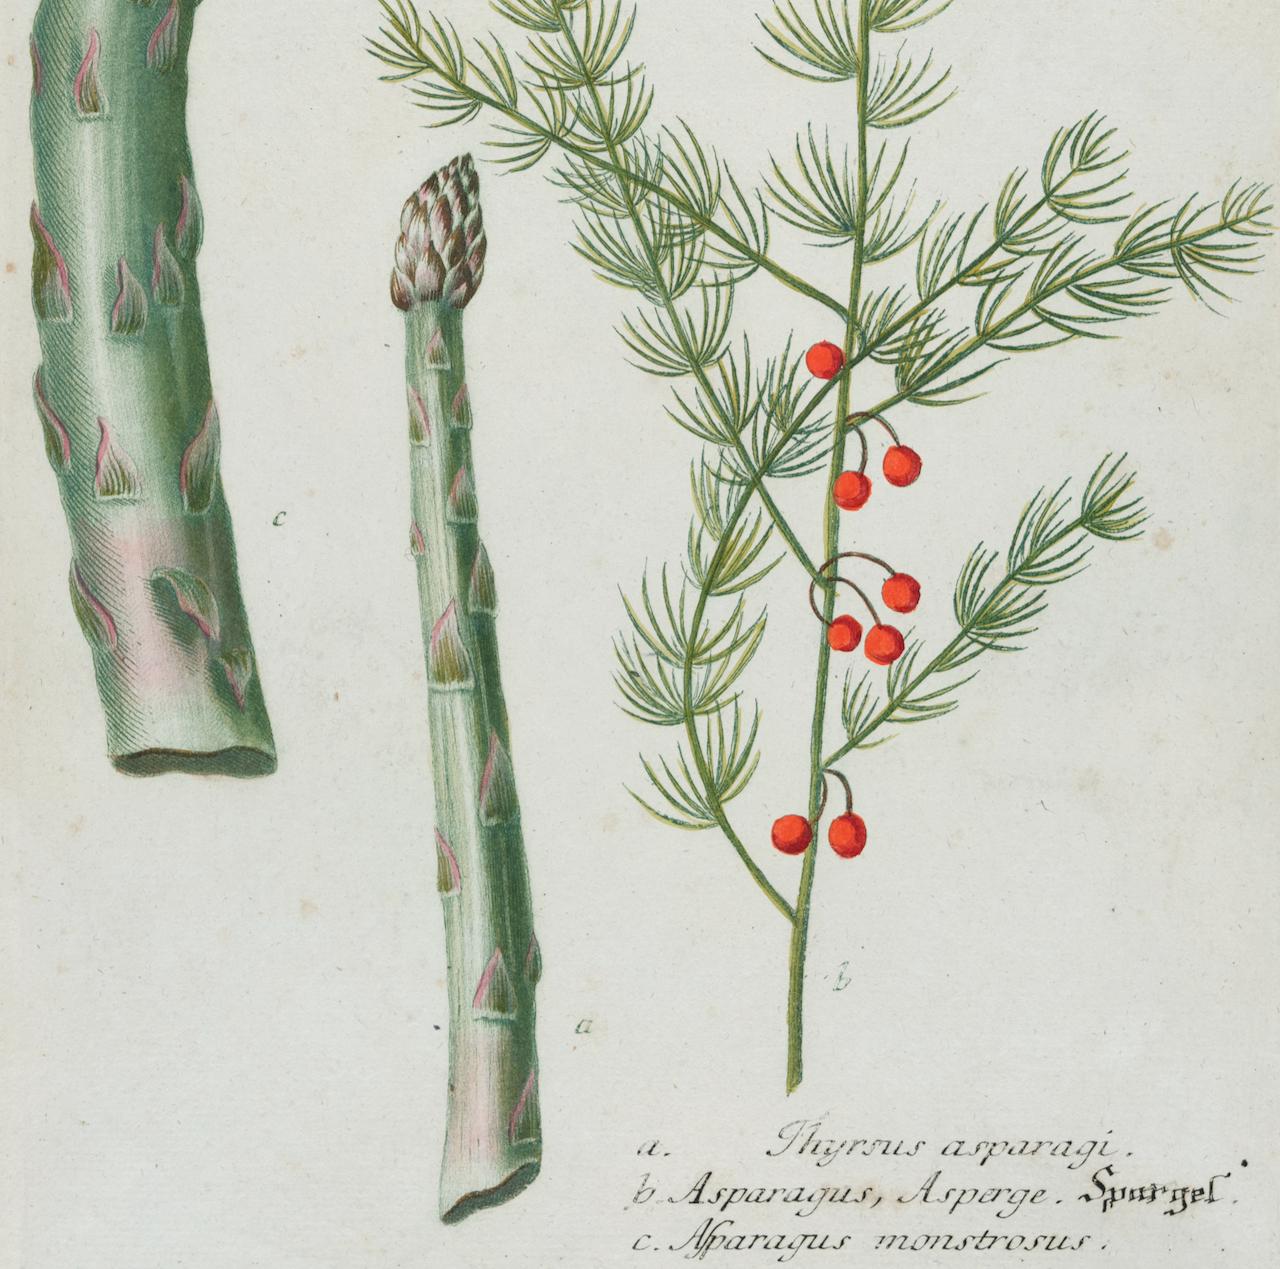 This colored botanical mezzotint and line engraving finished with hand coloring by Johann Wilhelm Weinmann (1683-1741) is entitled a. Thyrsus asparagi. b. Asparagus, Asperge. c. Asparagus monstrosus (Asparagus)